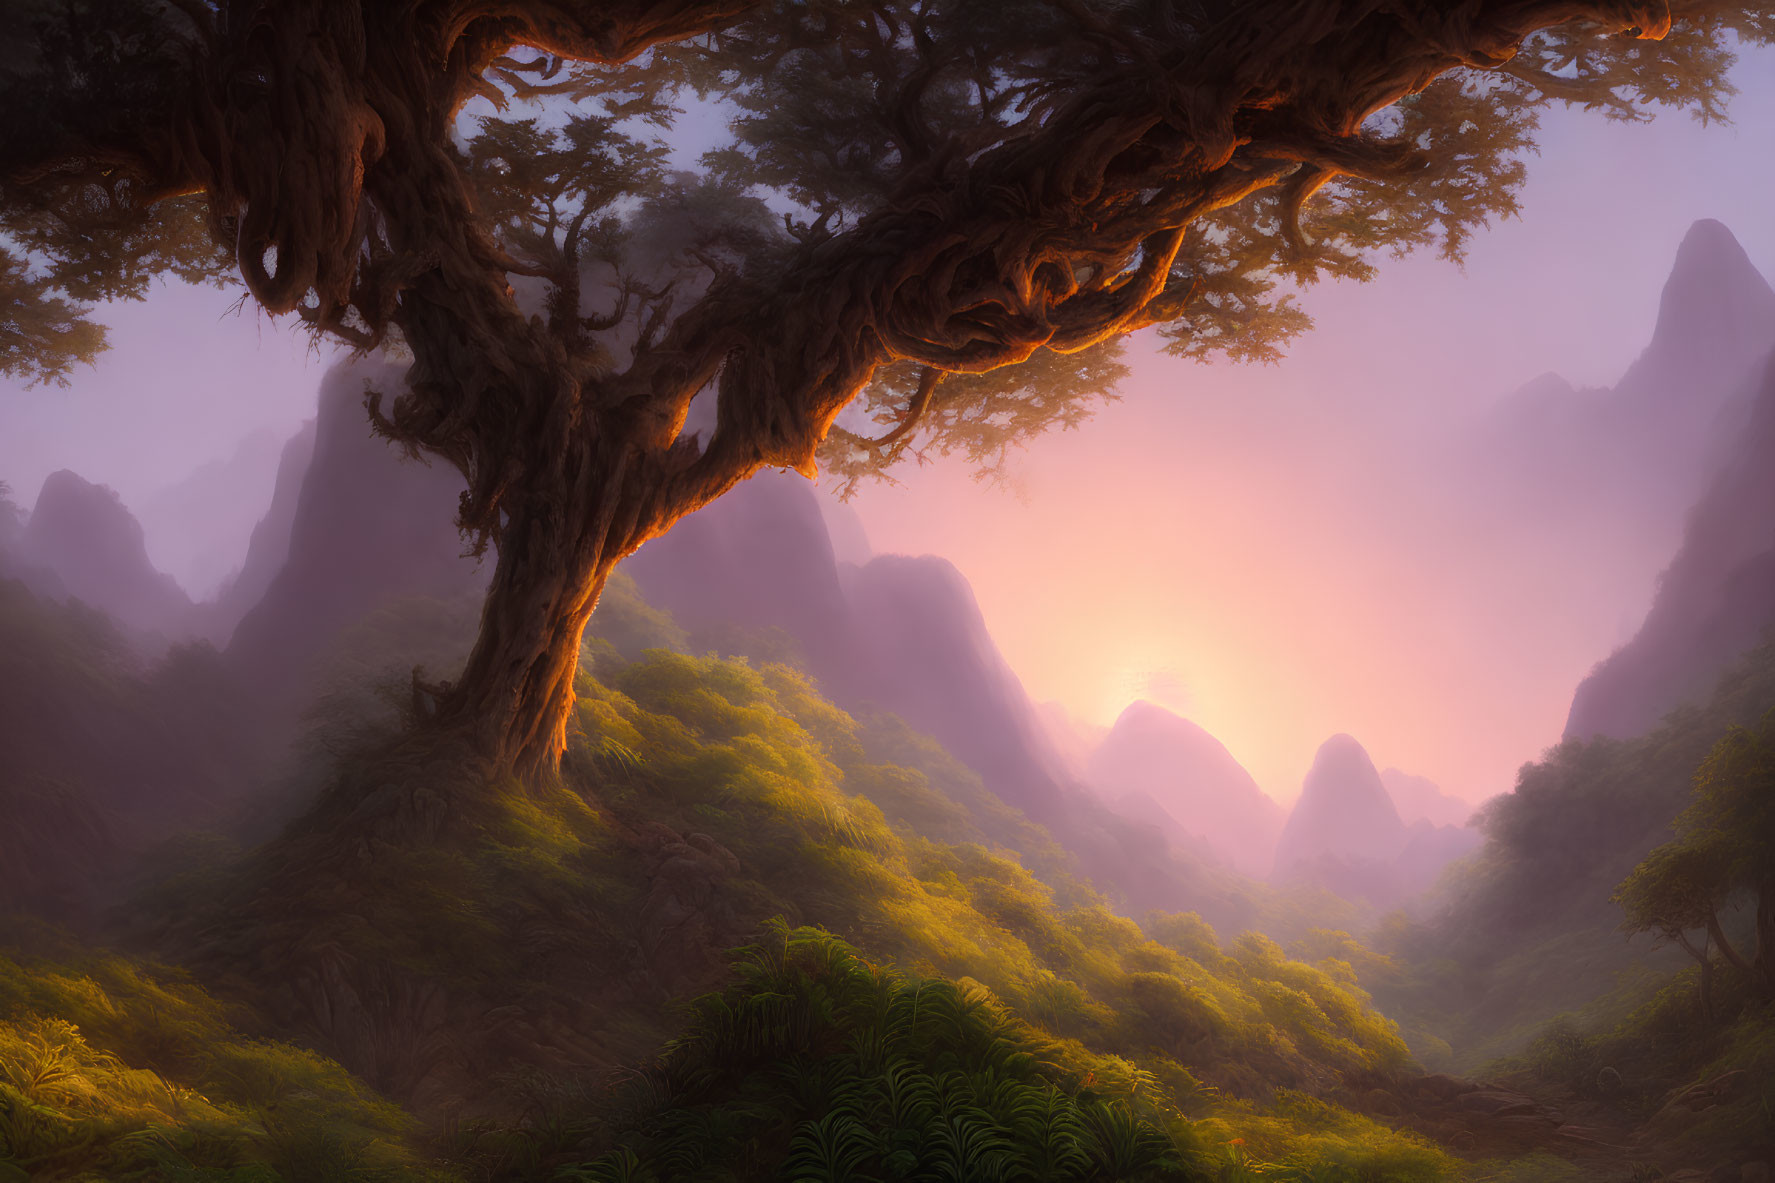 Misty sunset view through ancient twisted tree overlooking lush valley